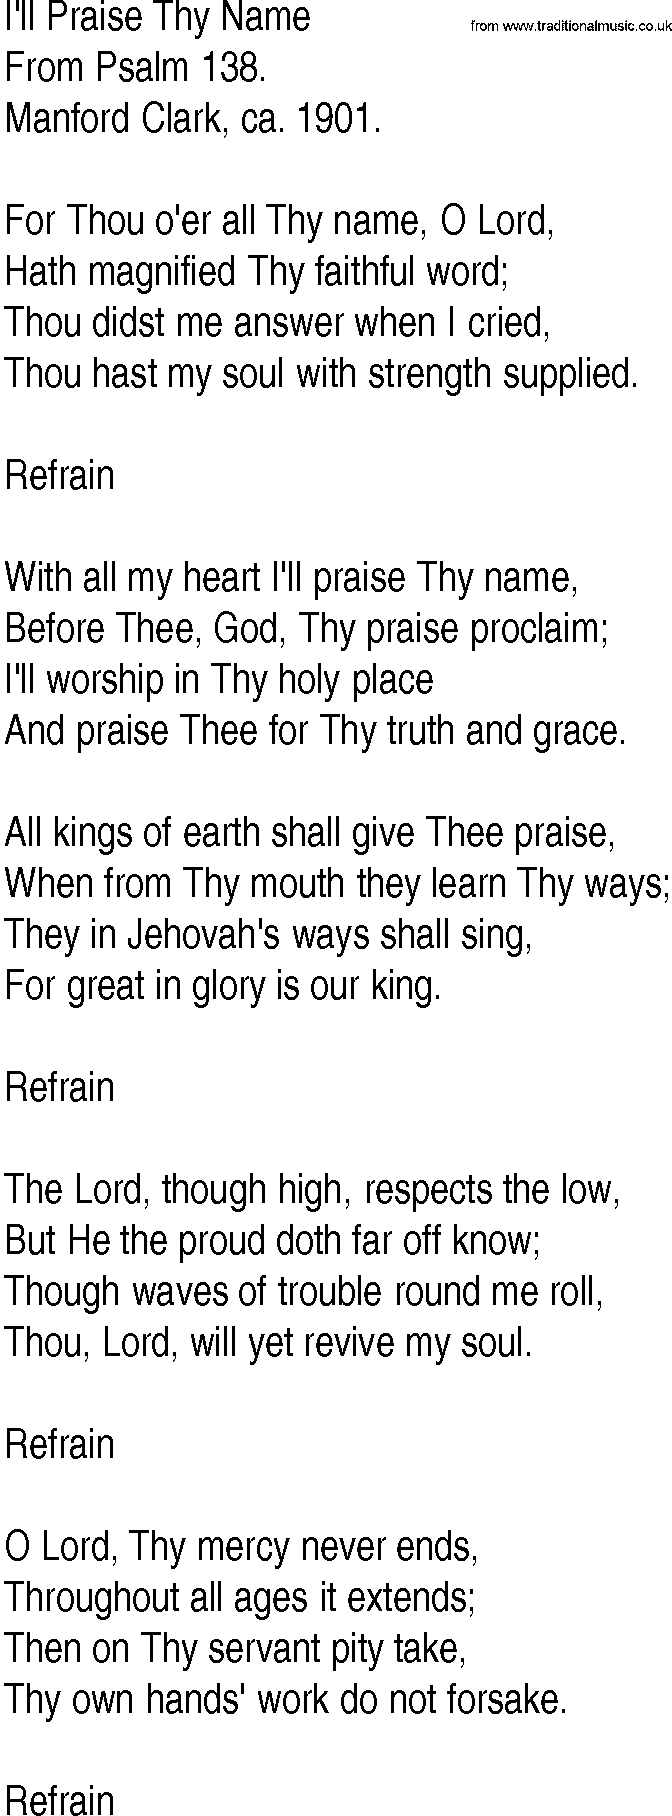 Hymn and Gospel Song: I'll Praise Thy Name by From Psalm lyrics